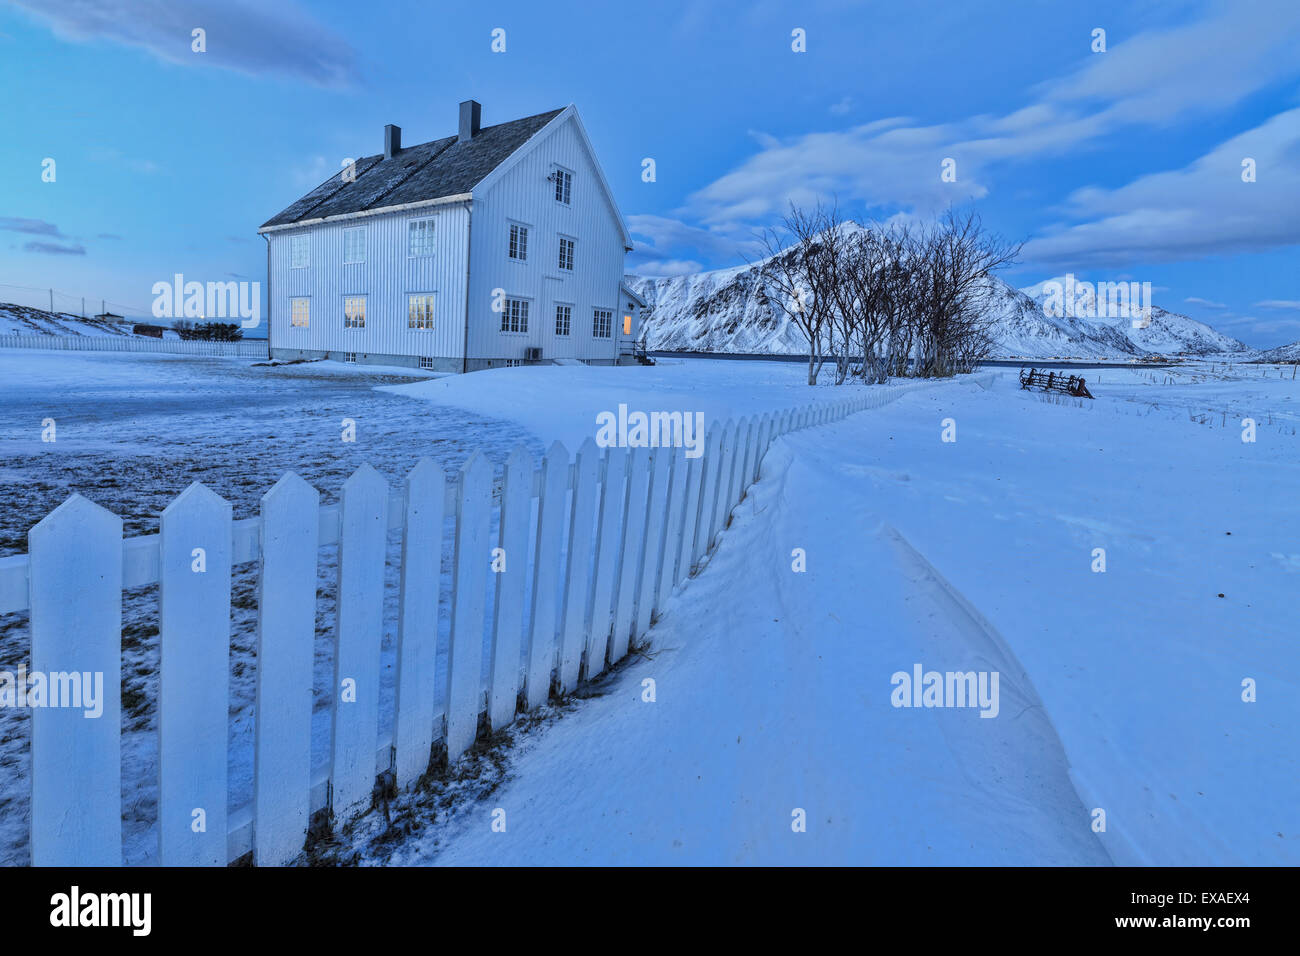 Typical house surrounded by snow at dusk, Flakstad, Lofoten Islands, Norway, Scandinavia, Europe Stock Photo